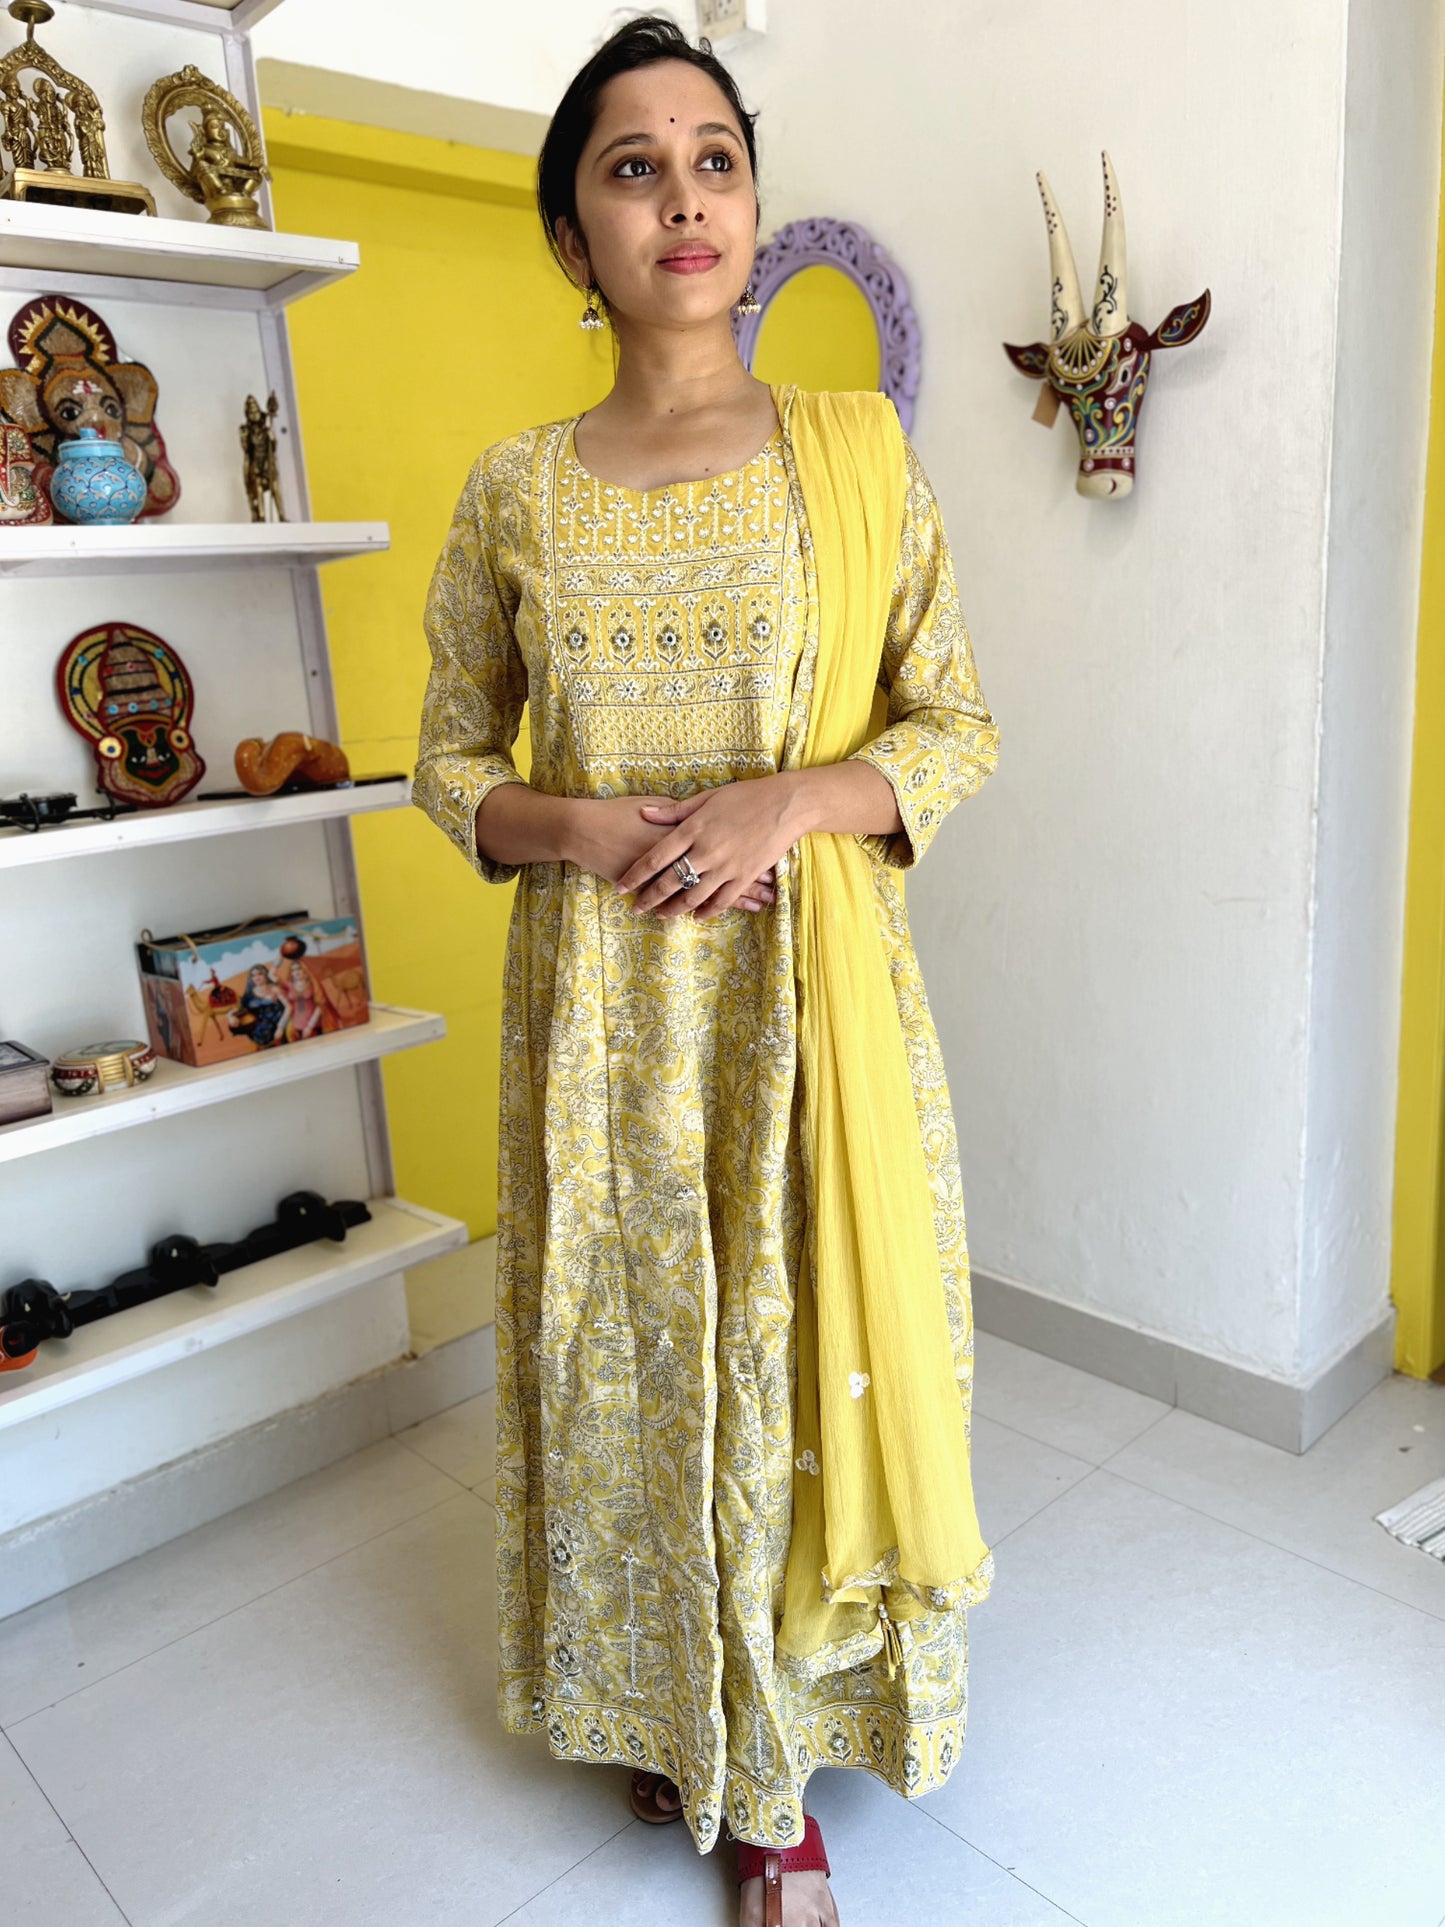 Southloom Stitched Semi Silk Salwar Set in Yellow with Thread Works on Yoke Portion and Prints on Body